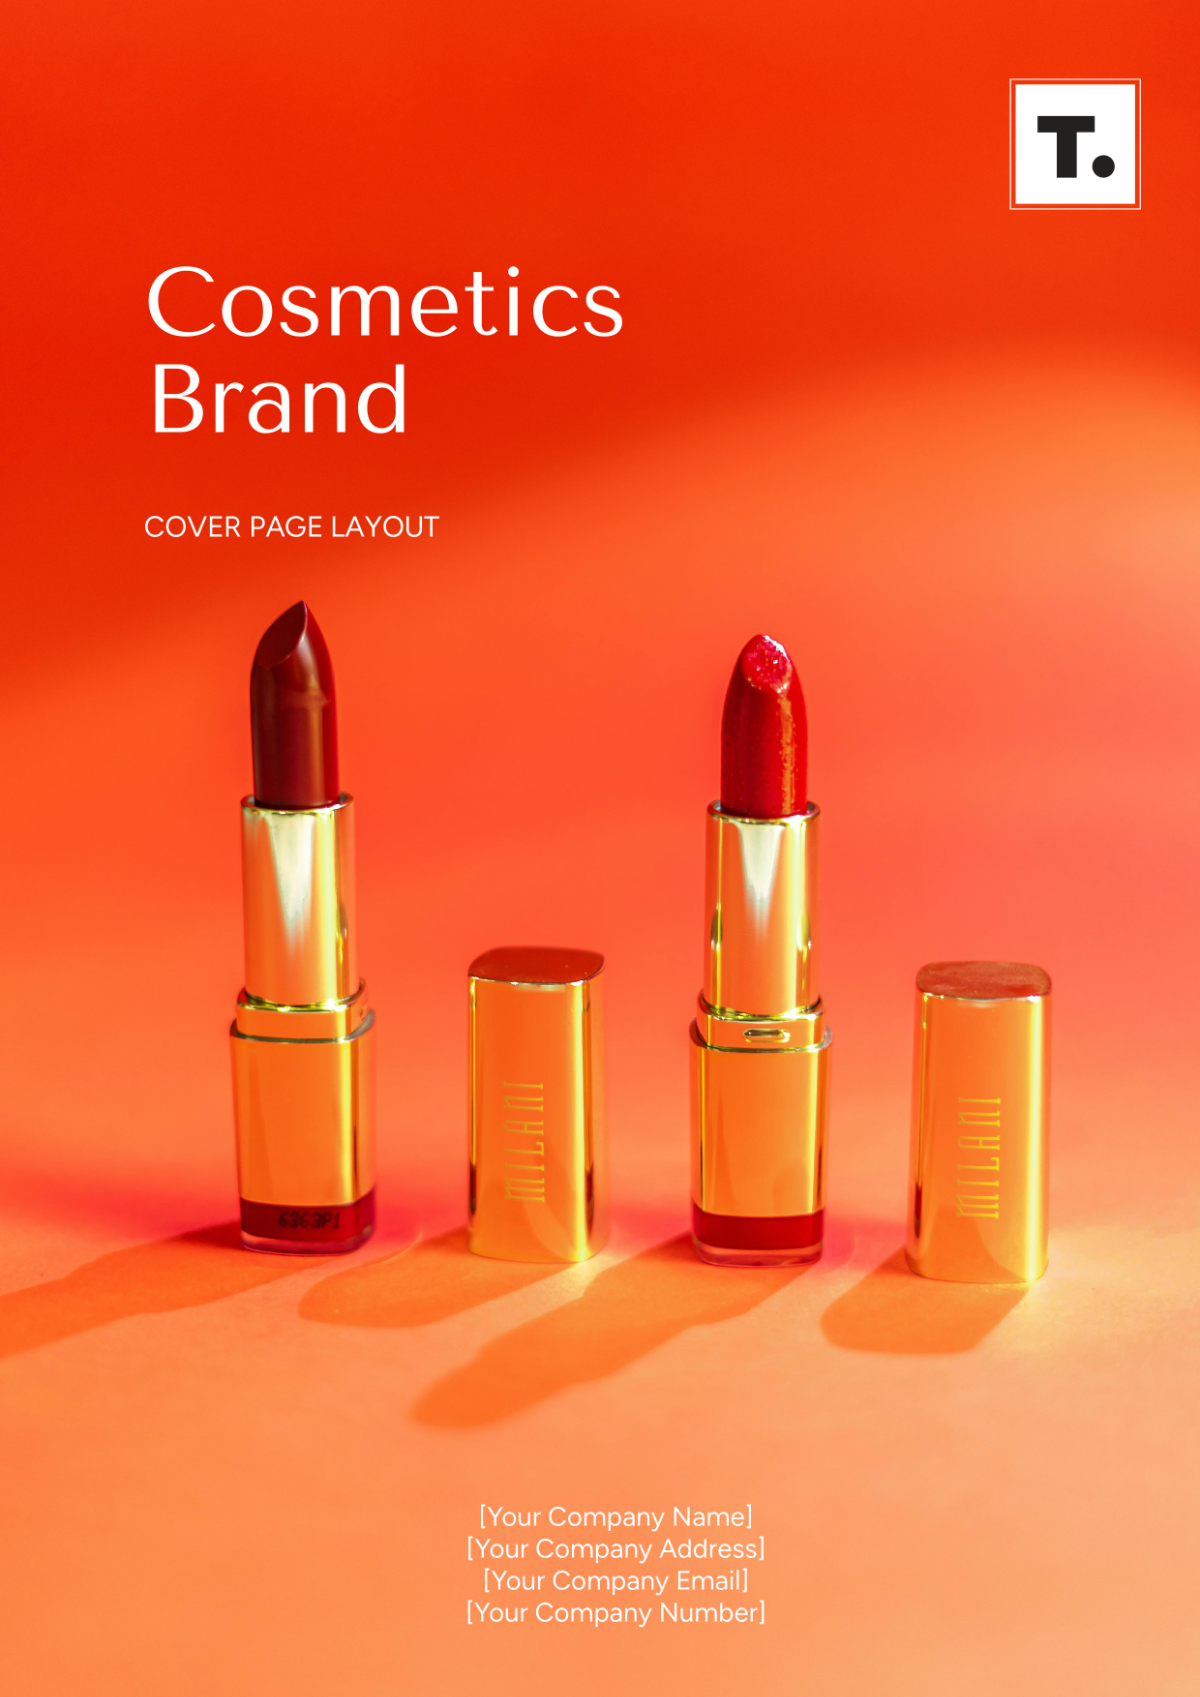 Cosmetics Brand Cover Page Layout